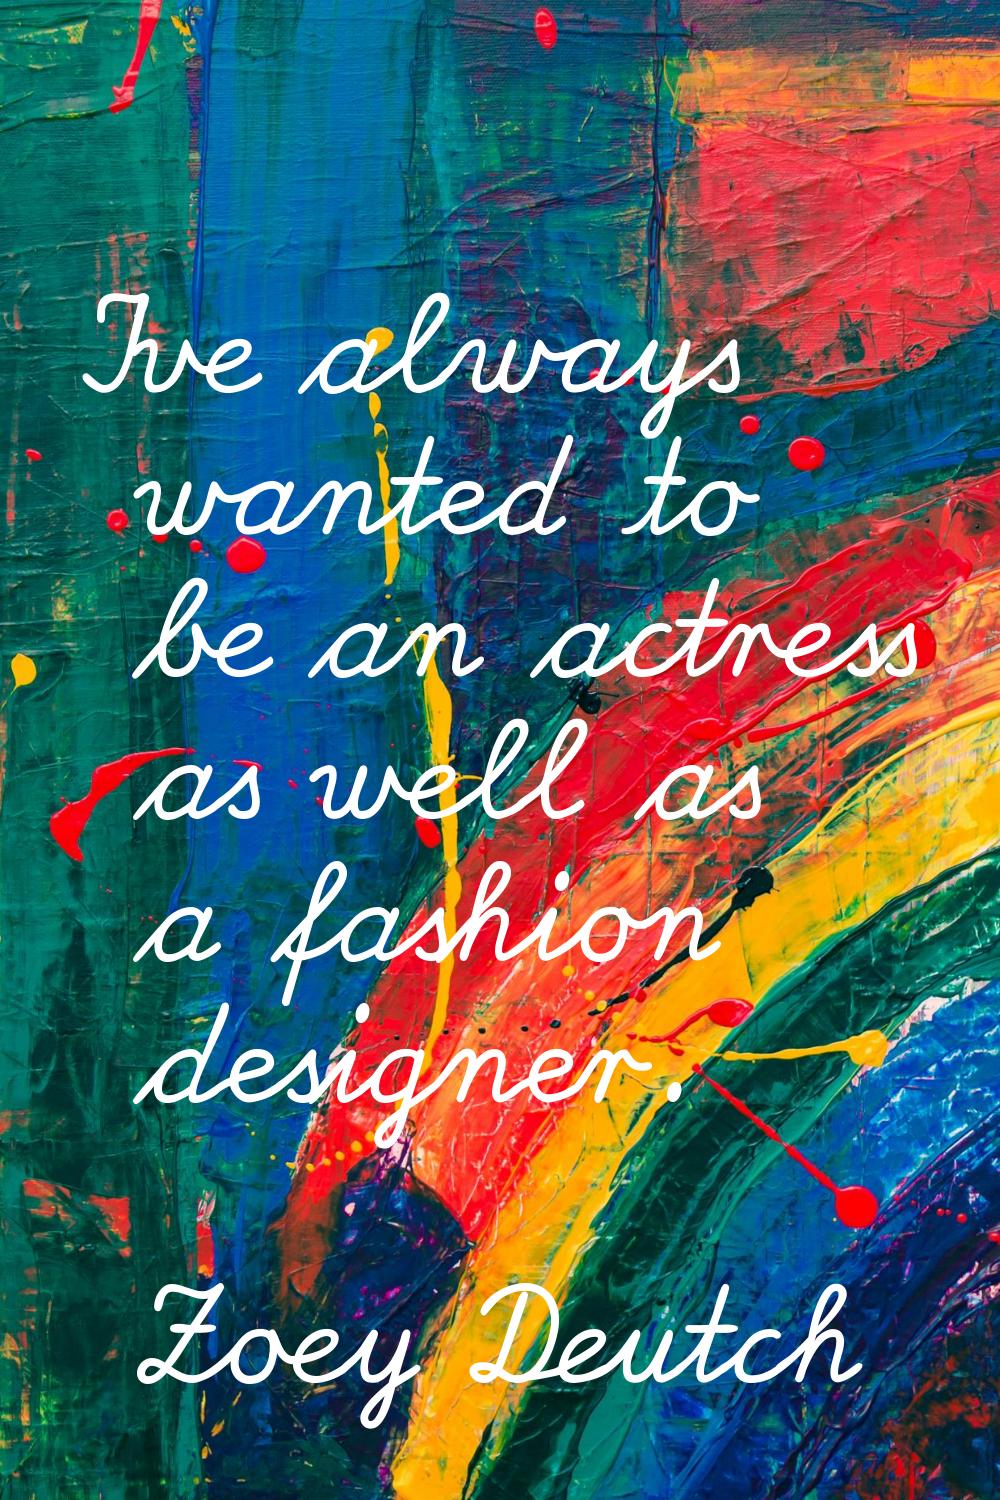 I've always wanted to be an actress as well as a fashion designer.